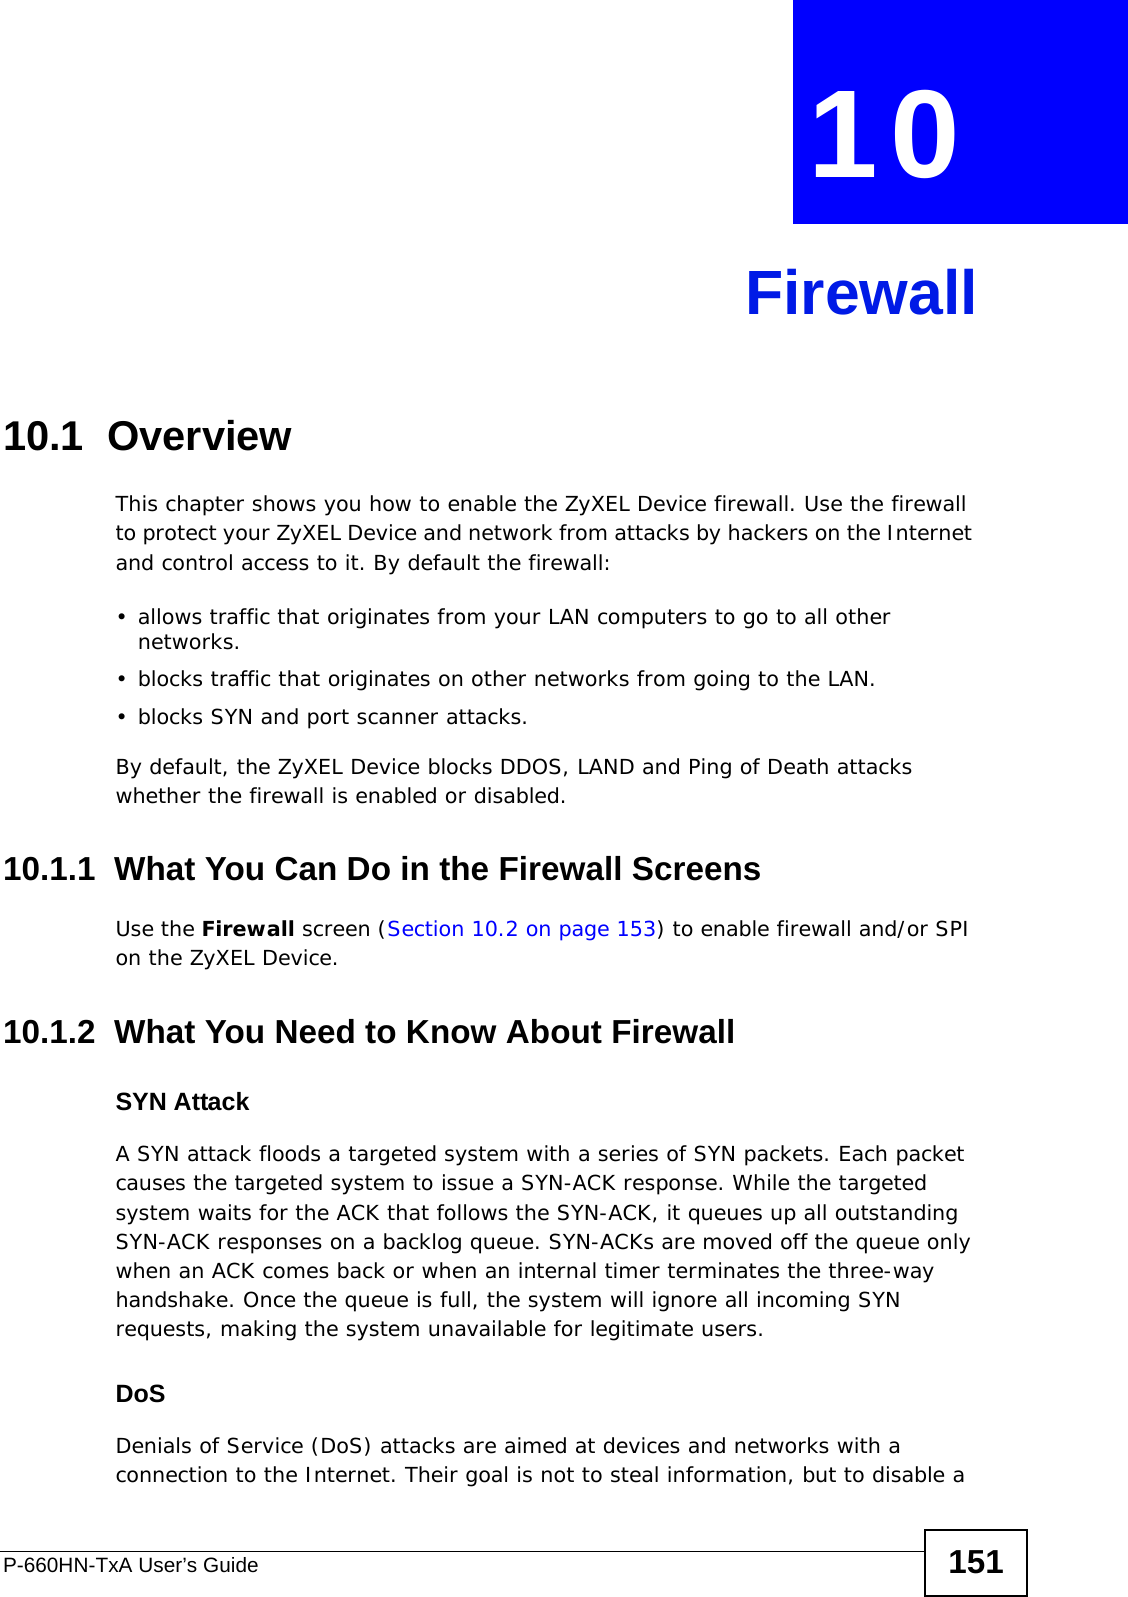 P-660HN-TxA User’s Guide 151CHAPTER  10 Firewall10.1  OverviewThis chapter shows you how to enable the ZyXEL Device firewall. Use the firewall to protect your ZyXEL Device and network from attacks by hackers on the Internet and control access to it. By default the firewall:• allows traffic that originates from your LAN computers to go to all other networks. • blocks traffic that originates on other networks from going to the LAN.• blocks SYN and port scanner attacks.By default, the ZyXEL Device blocks DDOS, LAND and Ping of Death attacks whether the firewall is enabled or disabled.10.1.1  What You Can Do in the Firewall ScreensUse the Firewall screen (Section 10.2 on page 153) to enable firewall and/or SPI on the ZyXEL Device.10.1.2  What You Need to Know About FirewallSYN AttackA SYN attack floods a targeted system with a series of SYN packets. Each packet causes the targeted system to issue a SYN-ACK response. While the targeted system waits for the ACK that follows the SYN-ACK, it queues up all outstanding SYN-ACK responses on a backlog queue. SYN-ACKs are moved off the queue only when an ACK comes back or when an internal timer terminates the three-way handshake. Once the queue is full, the system will ignore all incoming SYN requests, making the system unavailable for legitimate users.DoSDenials of Service (DoS) attacks are aimed at devices and networks with a connection to the Internet. Their goal is not to steal information, but to disable a 